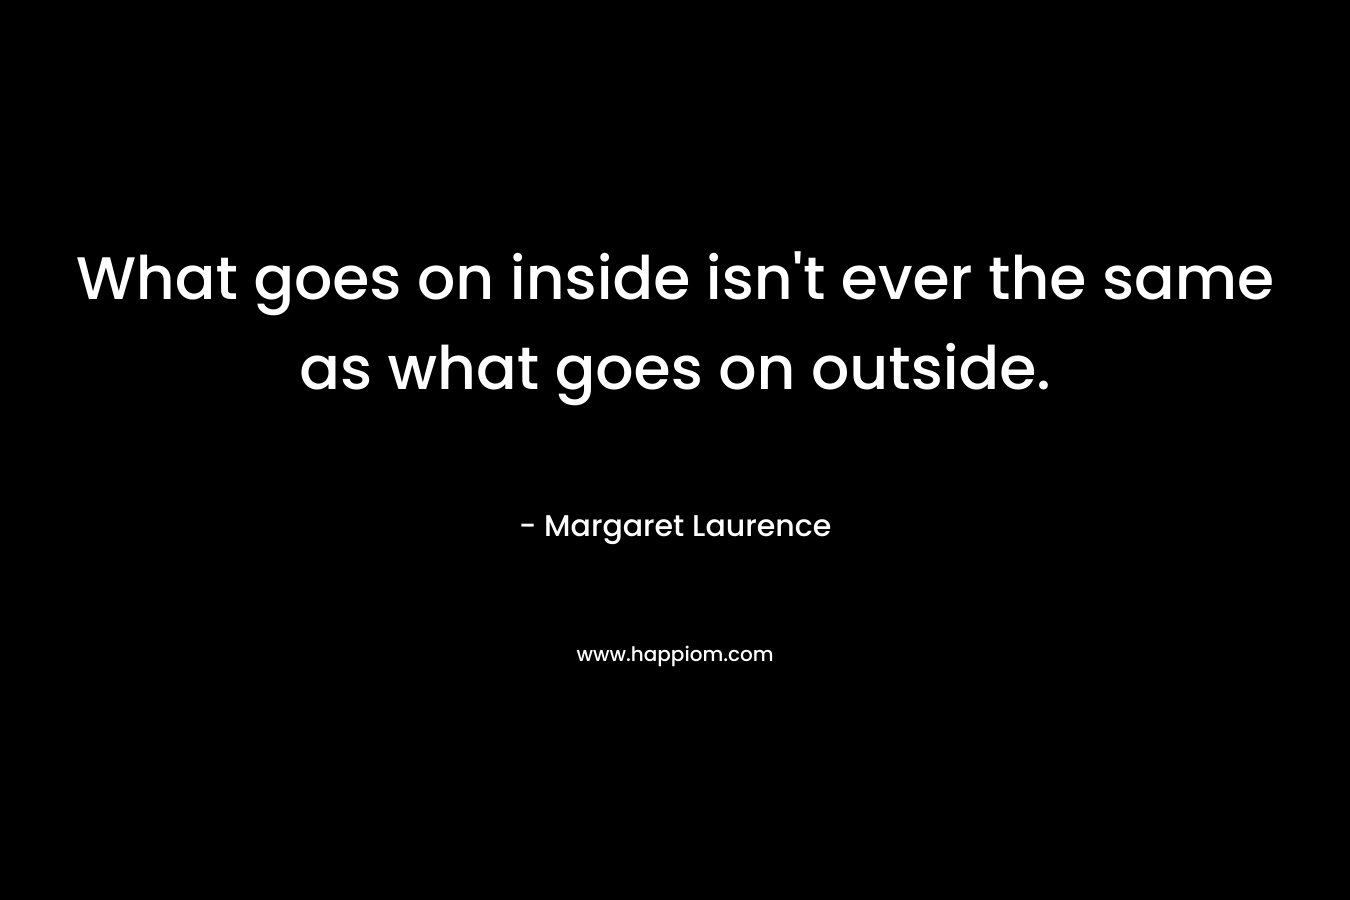 What goes on inside isn't ever the same as what goes on outside.